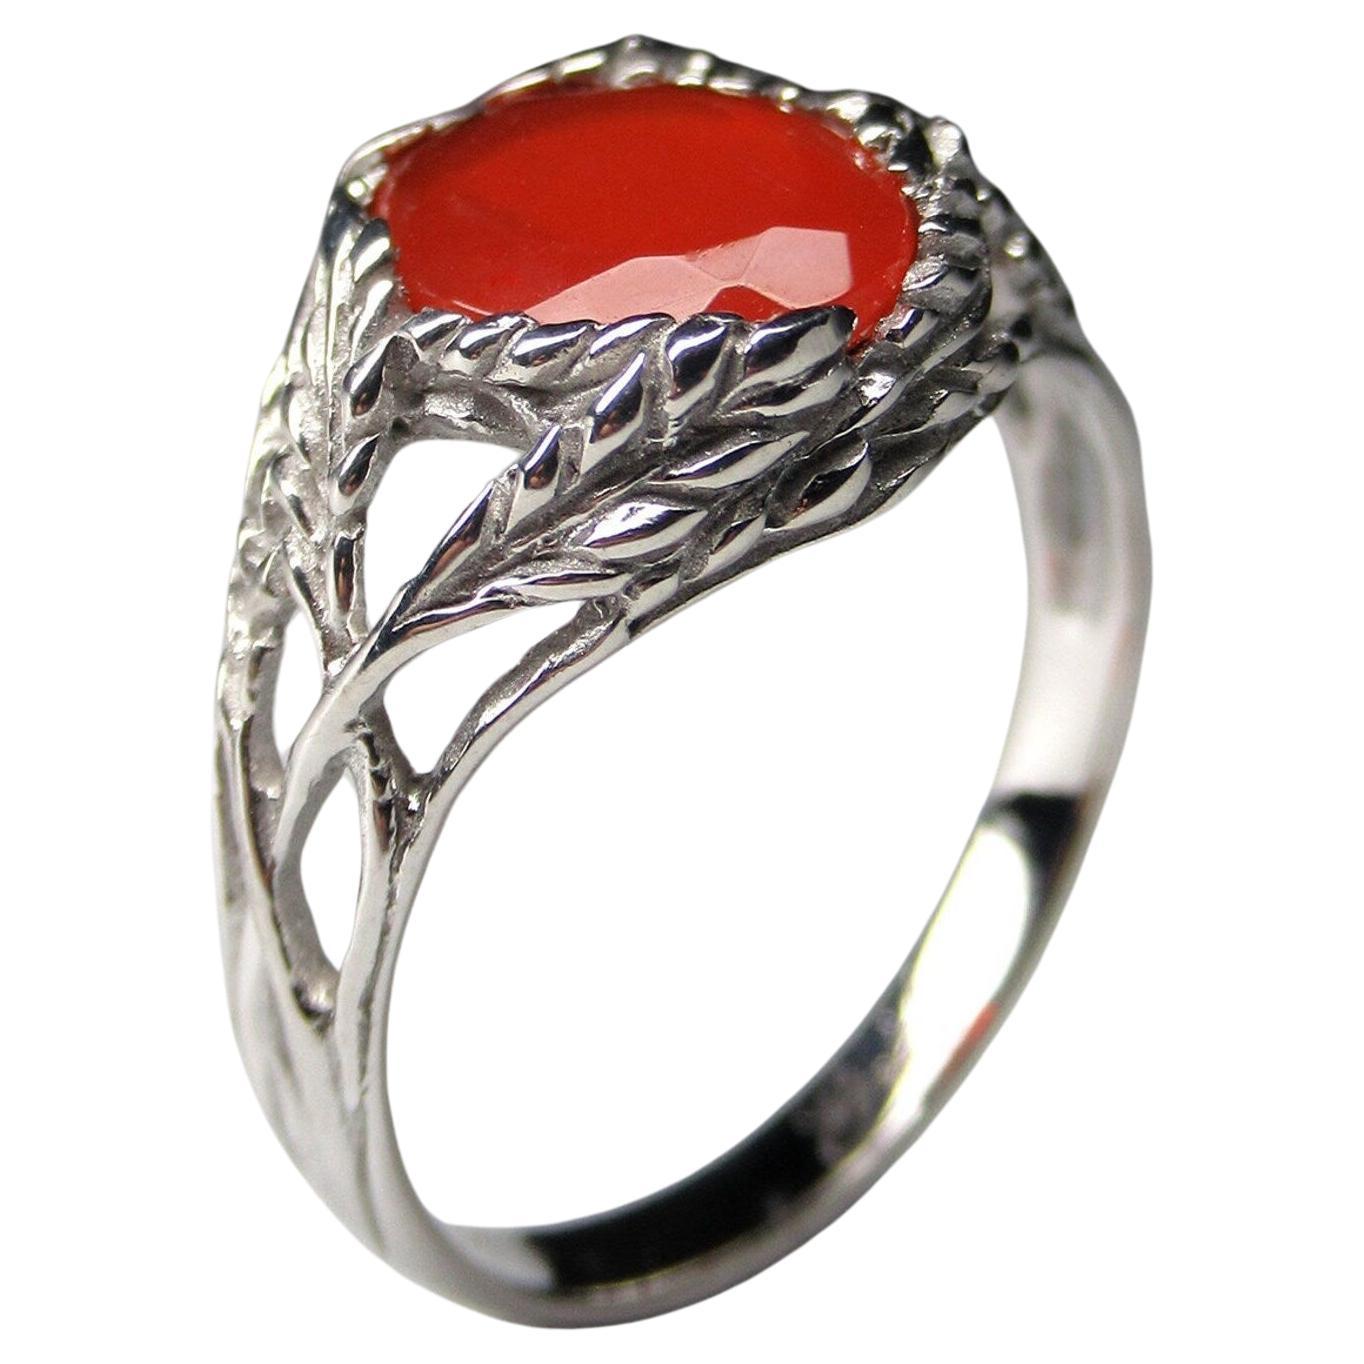 Fire Opal Silver Ring Red Mexican Gemstone Fine Art Nouveau Style Unisex Jewelry